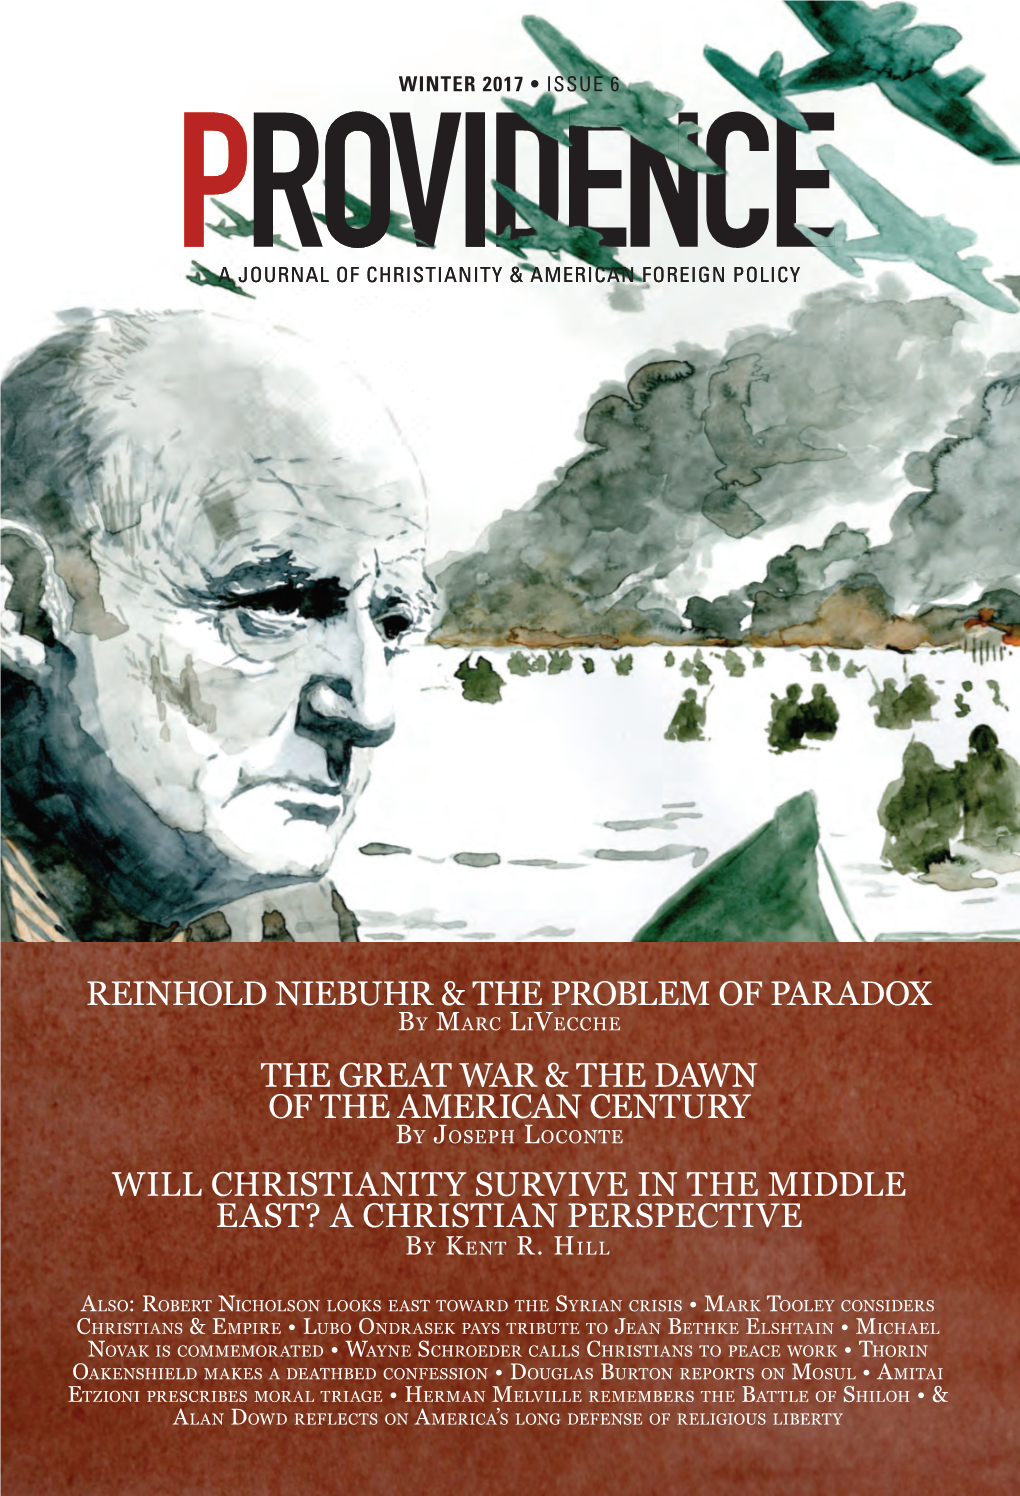 Reinhold Niebuhr & the Problem of Paradox The